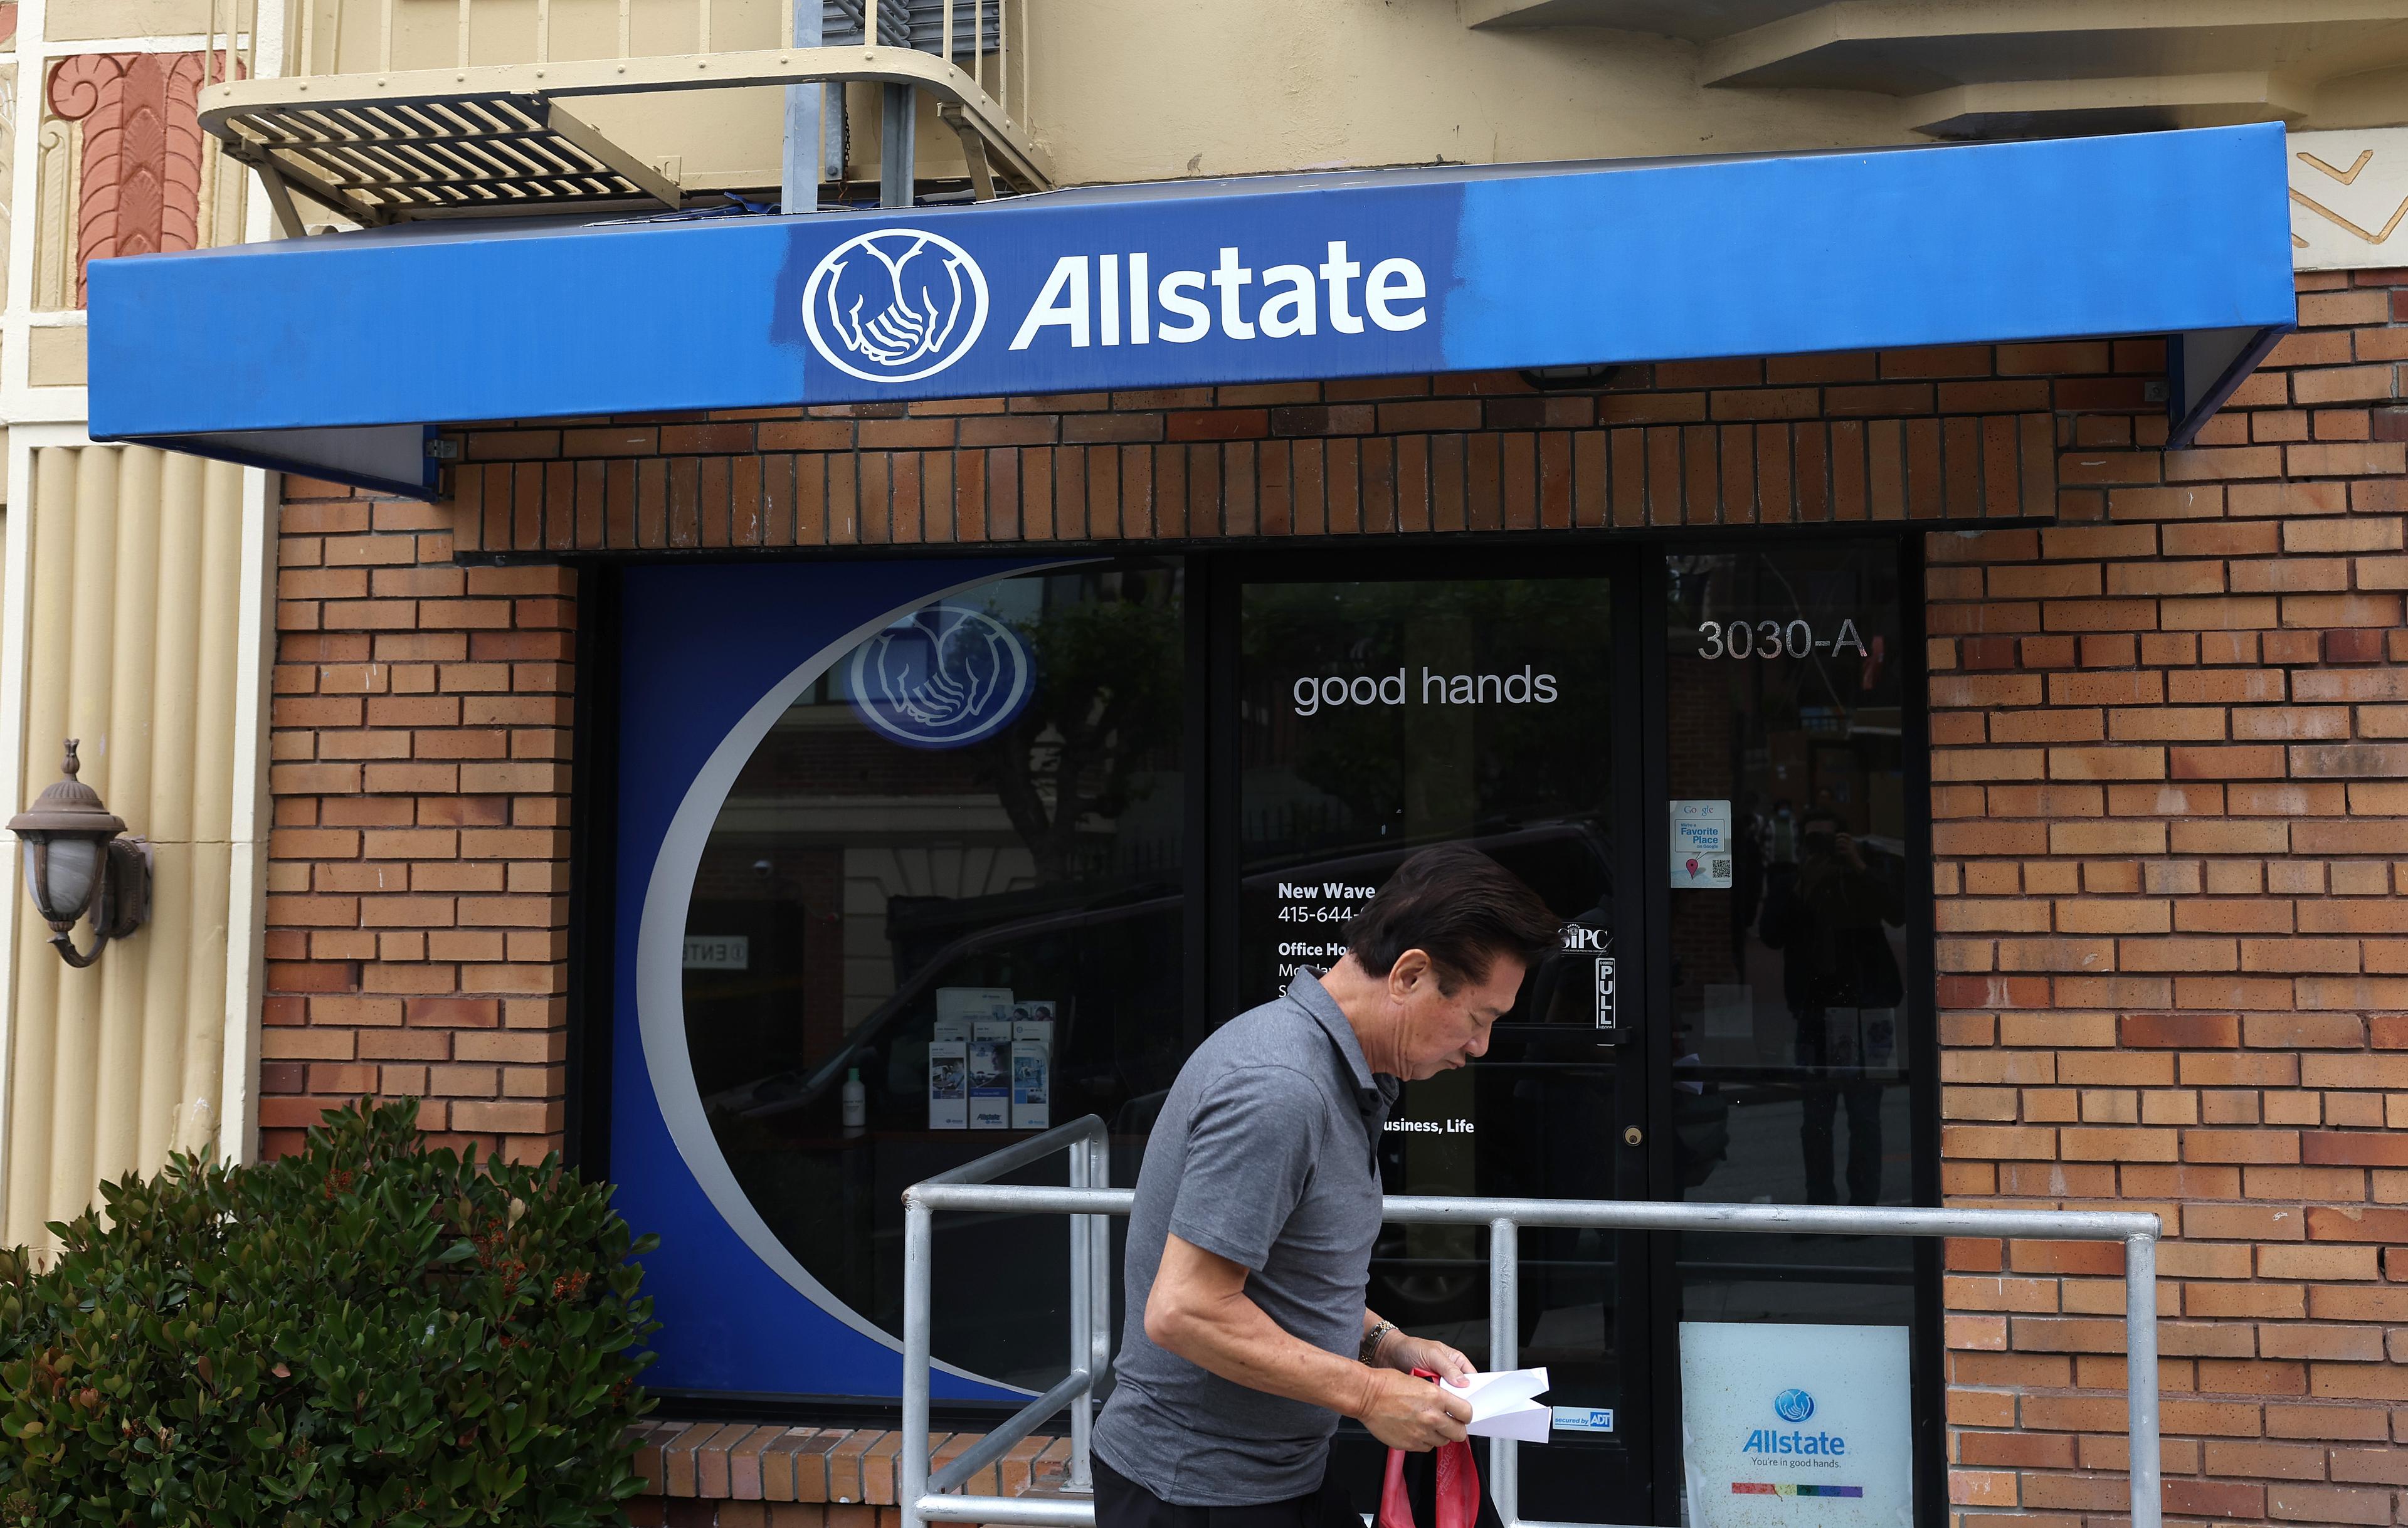 Allstate Increases Auto Insurance Rates by 30 Percent in California